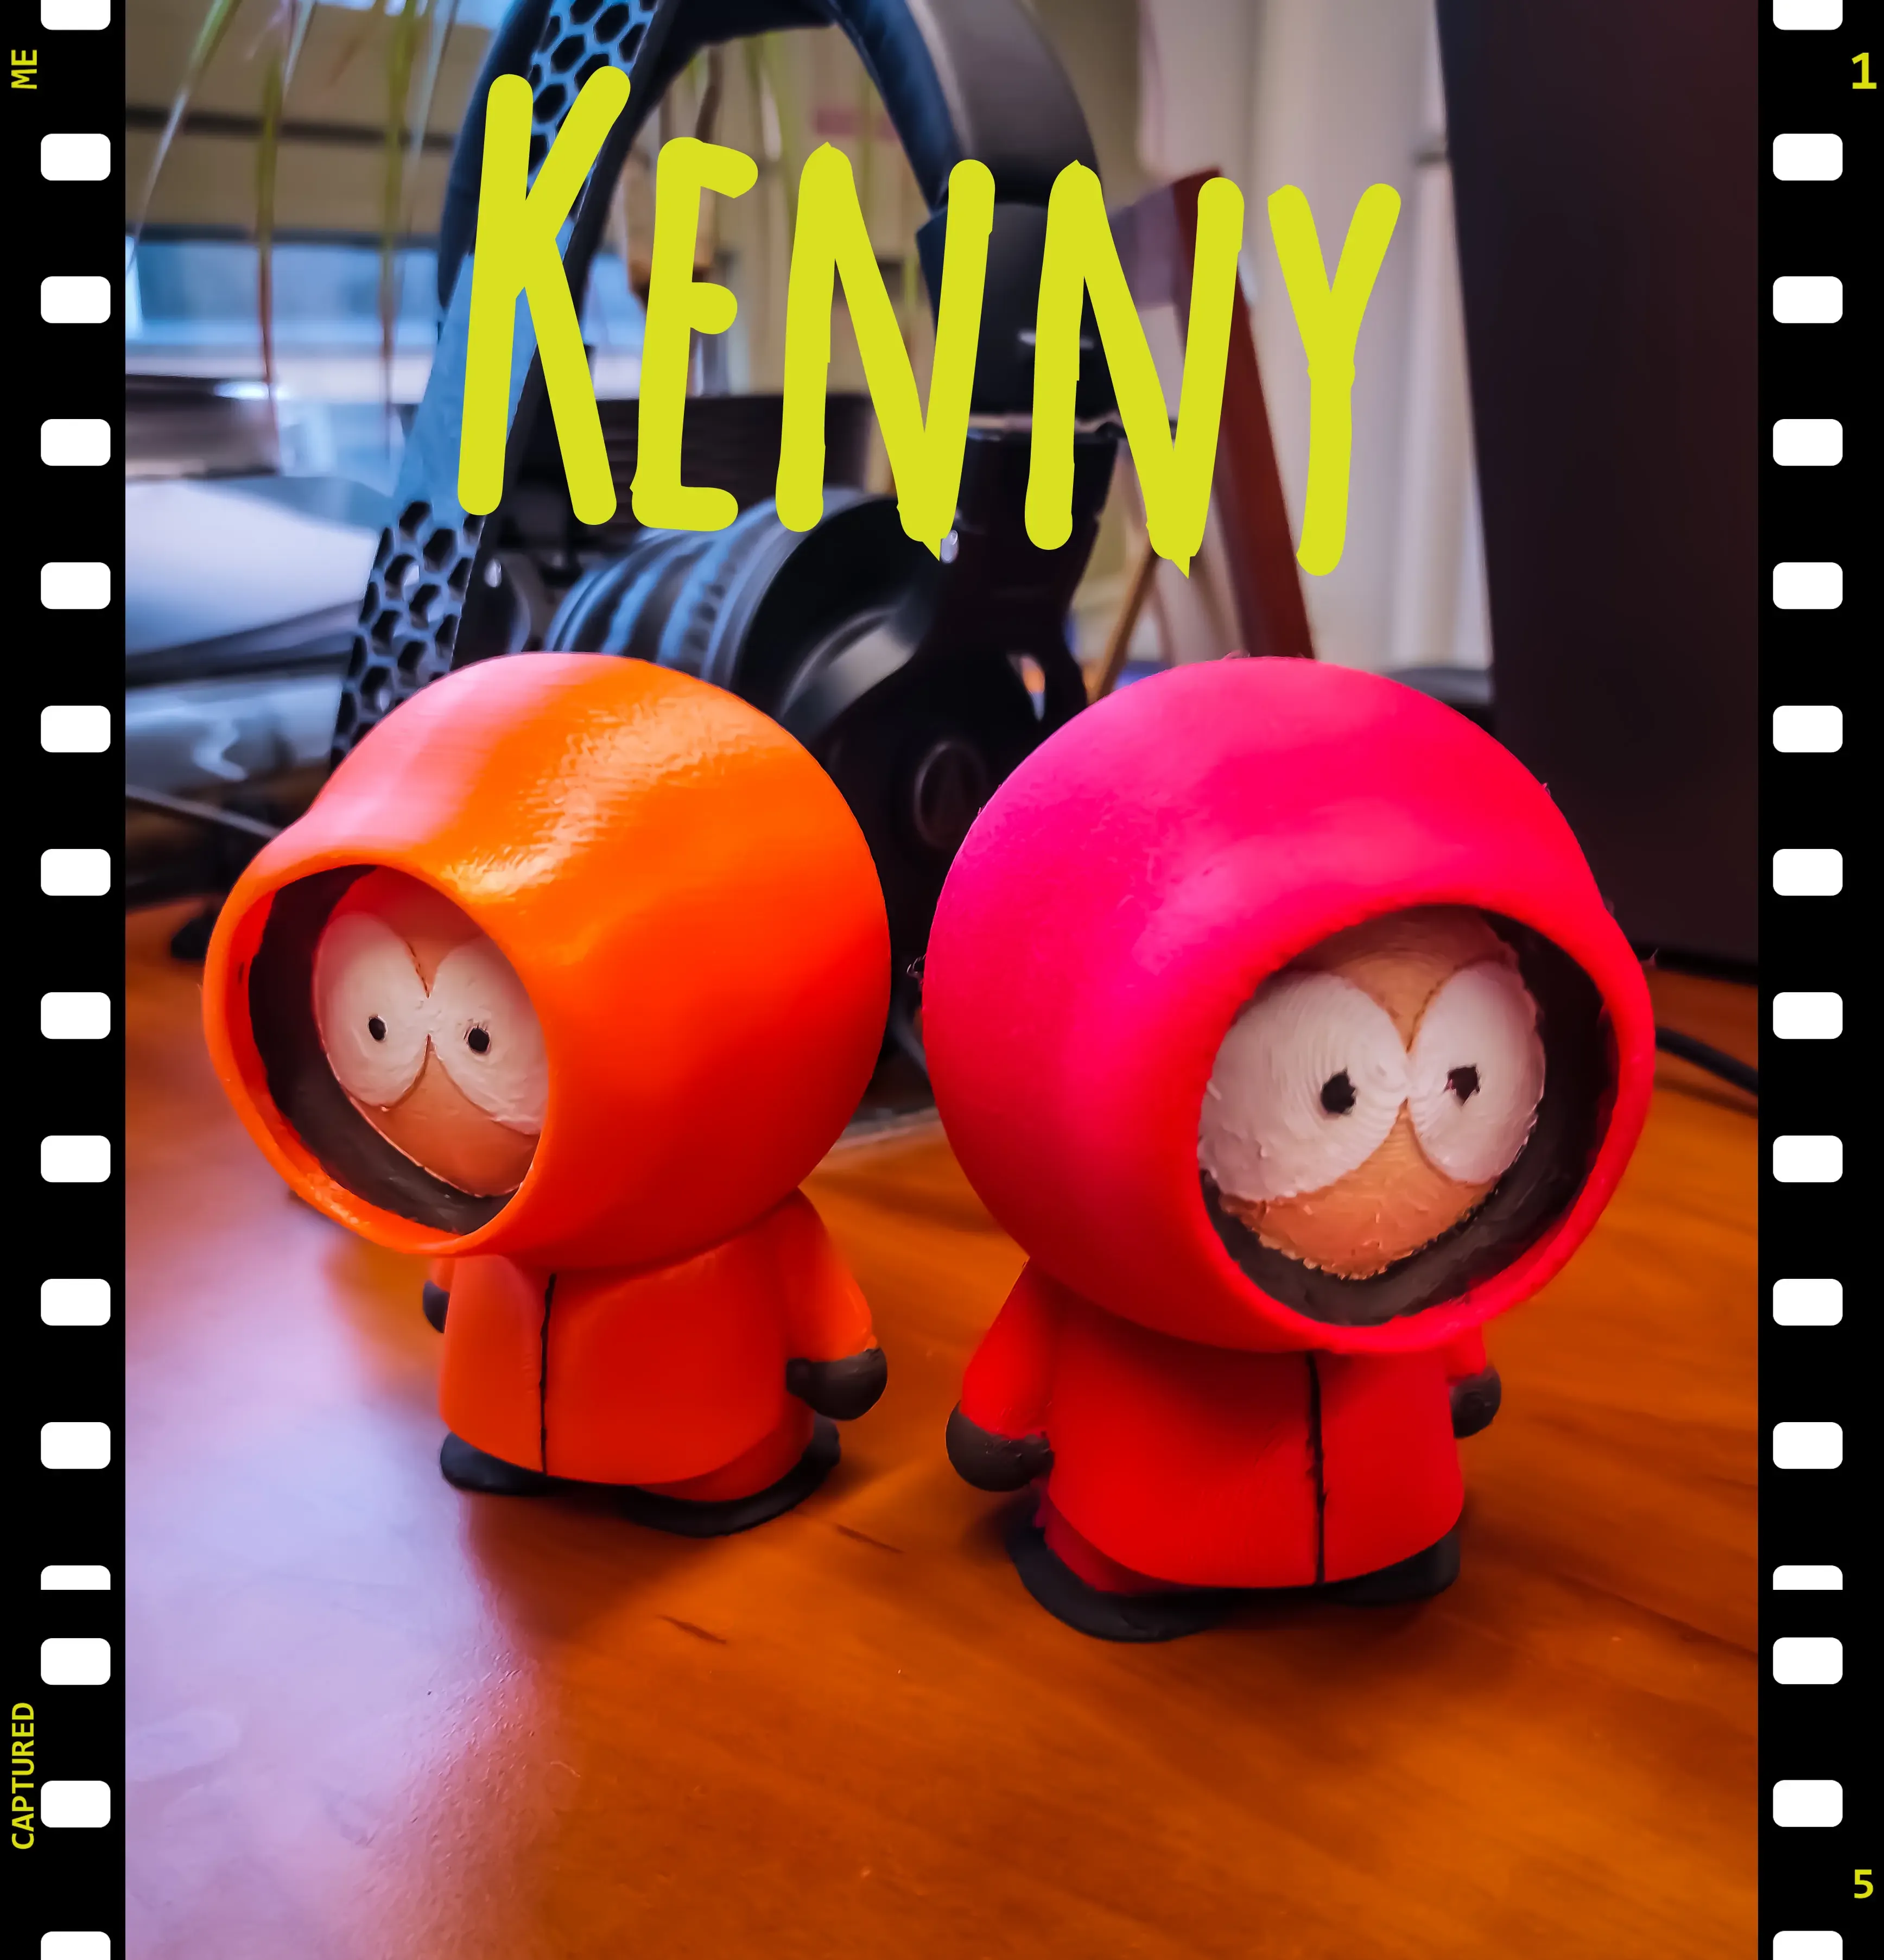 Kenny from South Park